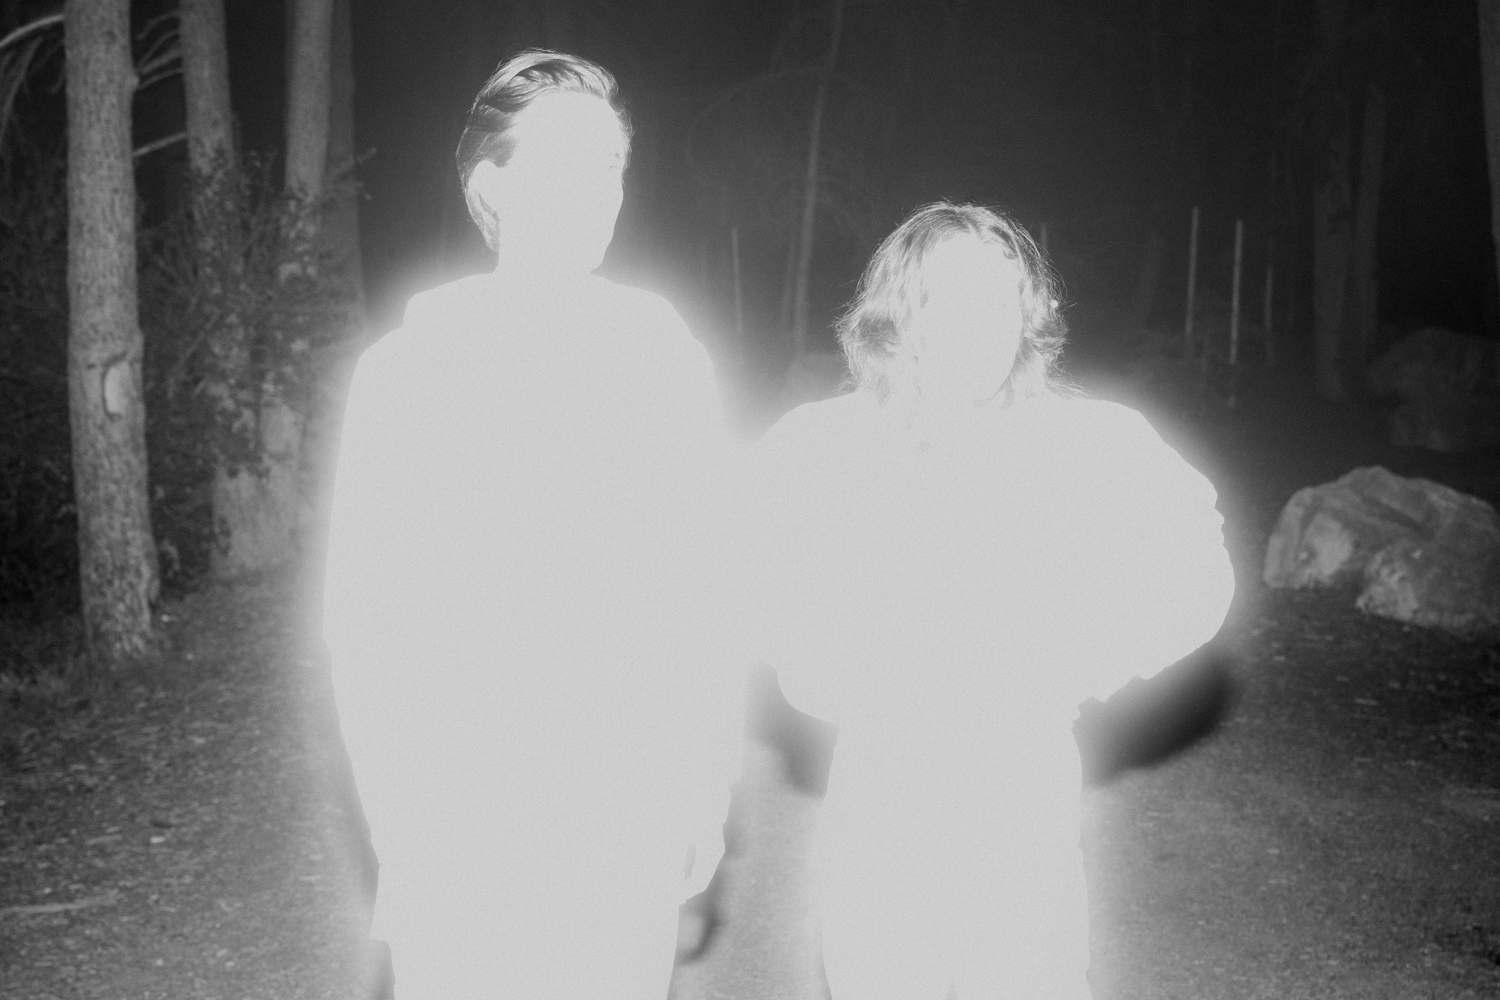 Purity Ring announce new album, ‘WOMB’